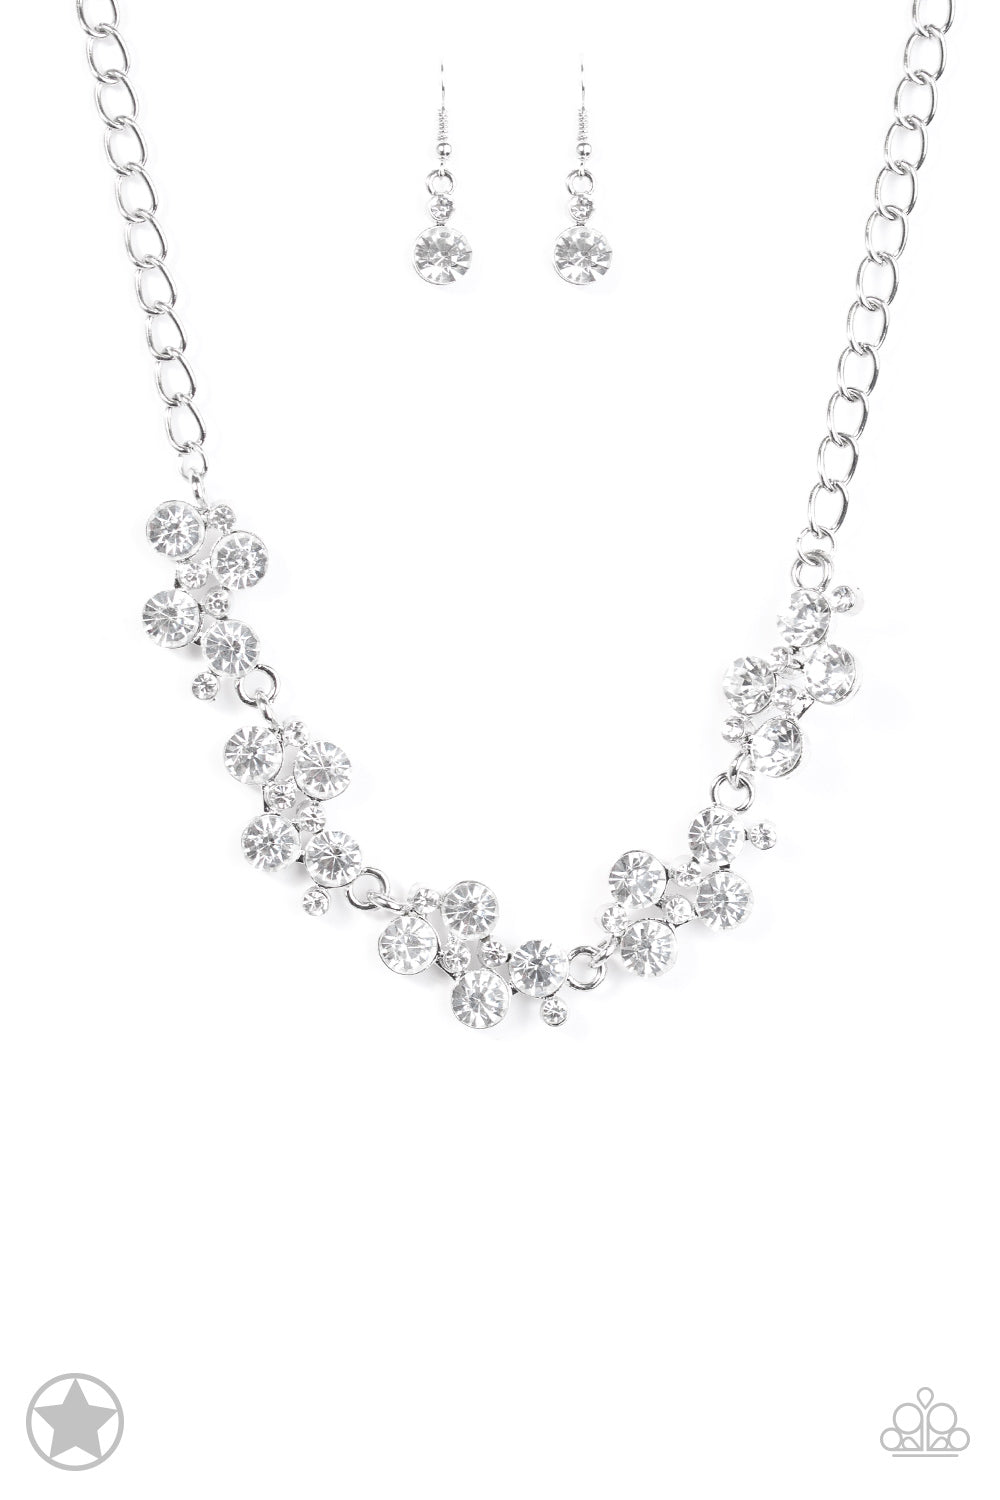 Hollywood Hills Necklace__Blockbuster__White